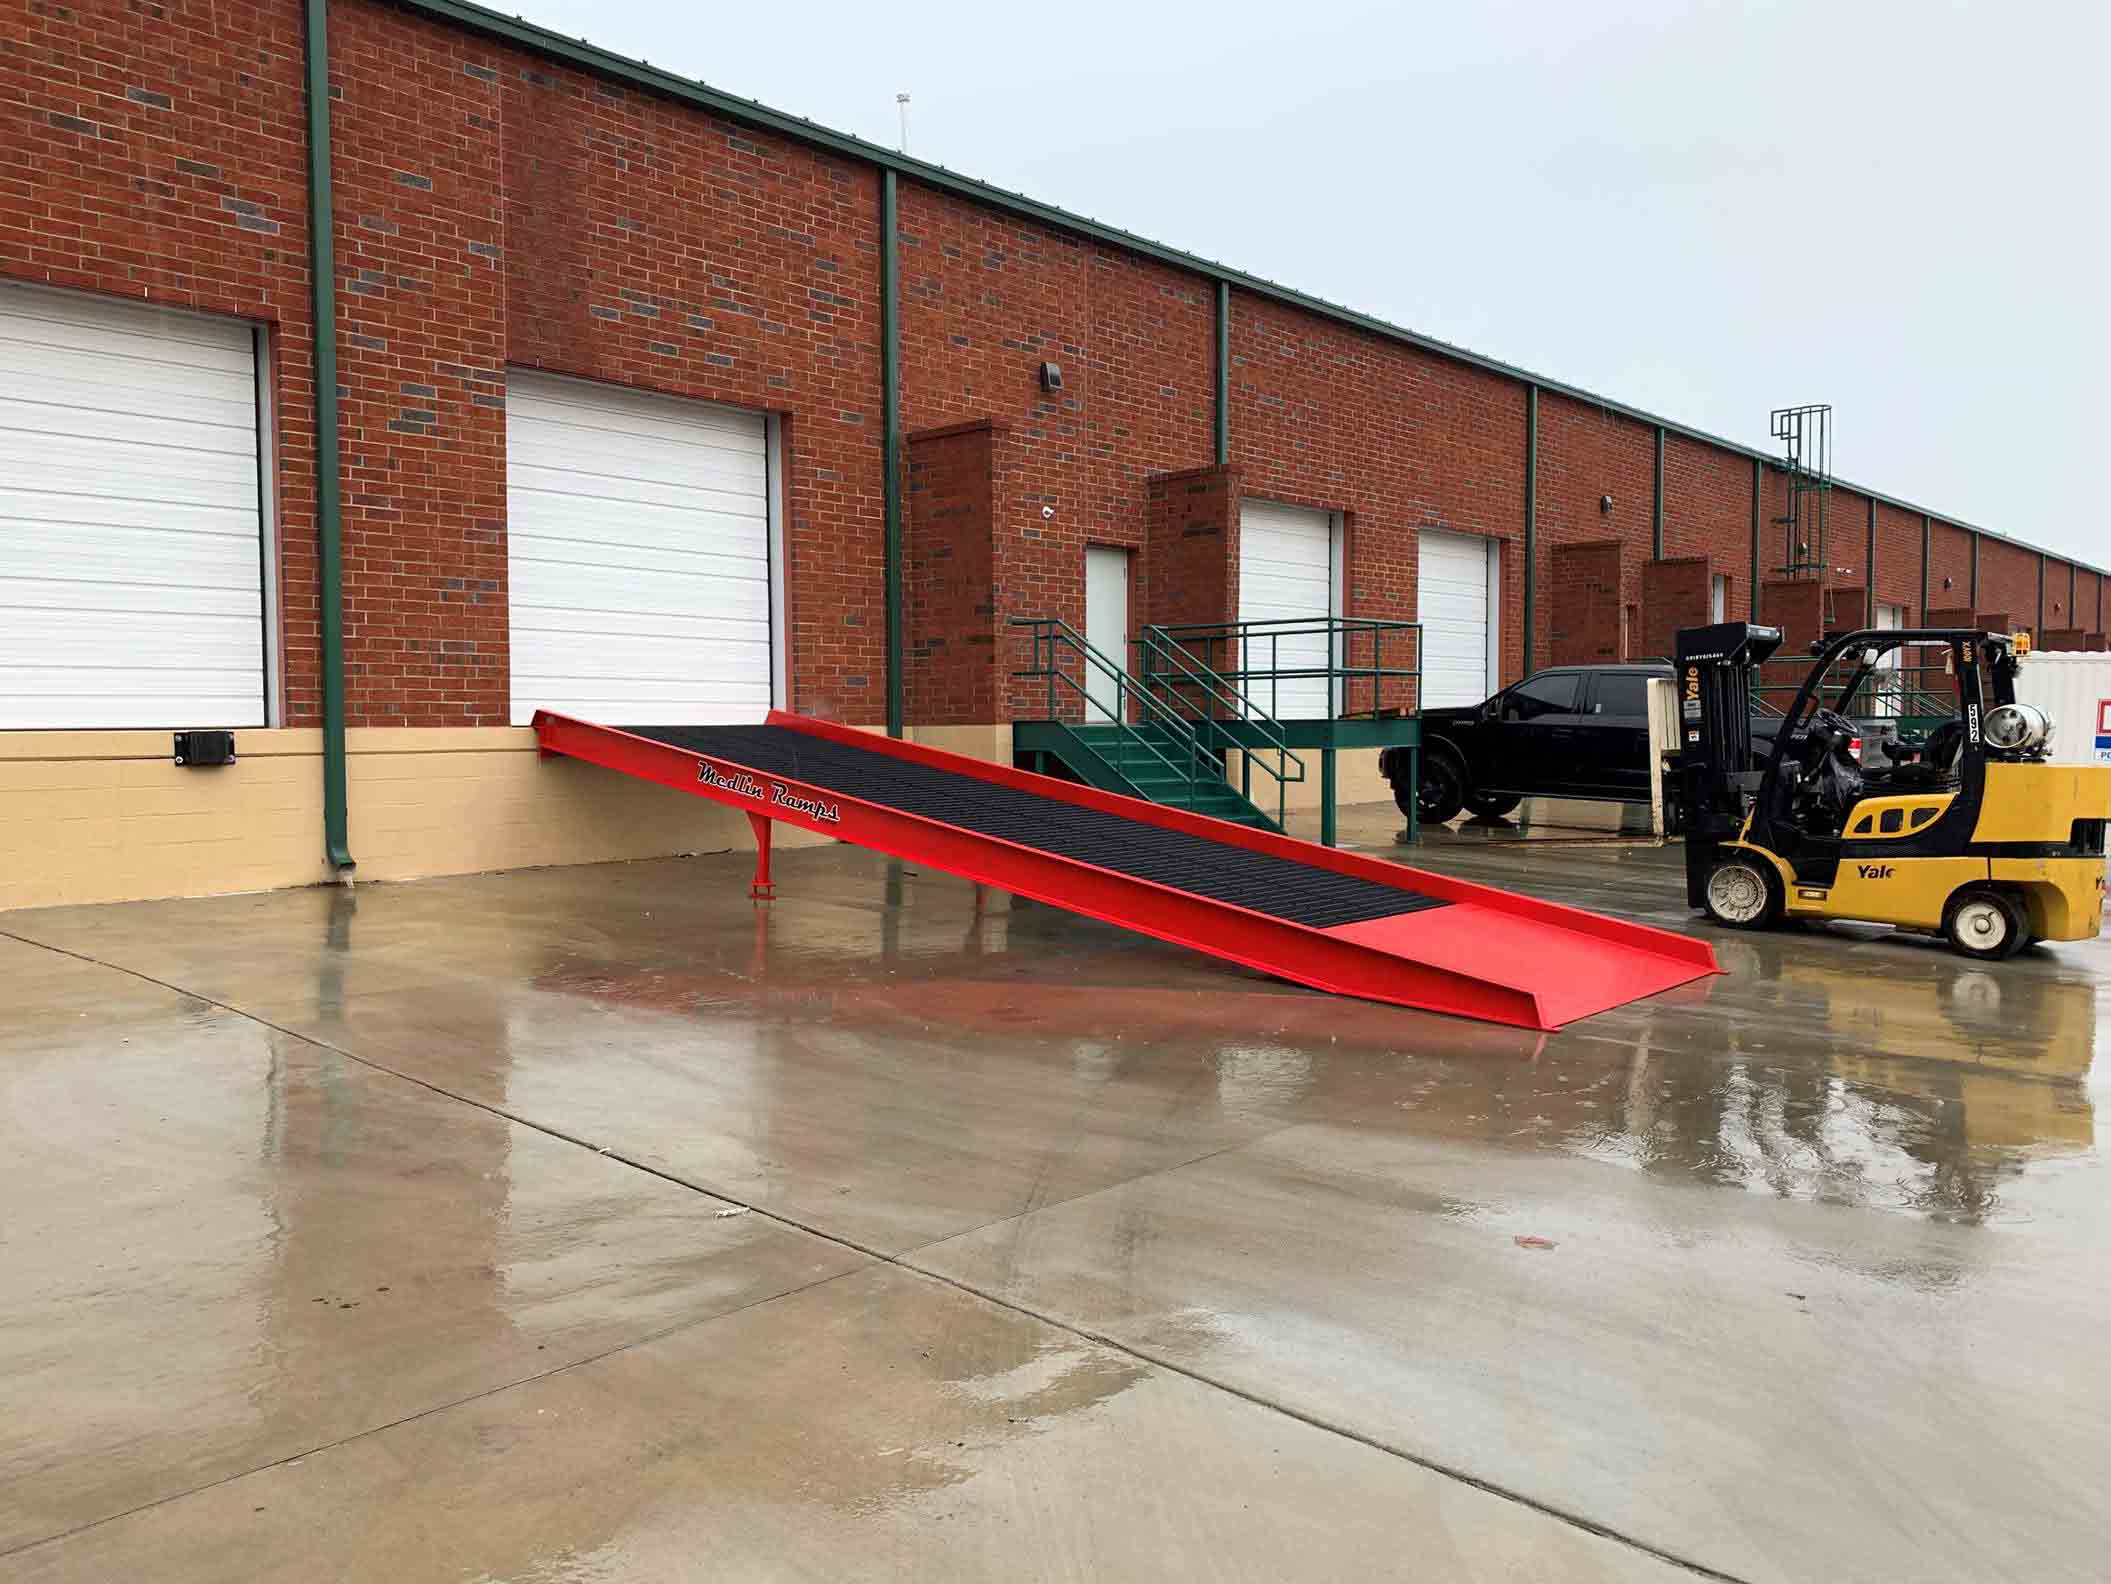 A black and red Medlin Ramps ramp used outside a warehouse.